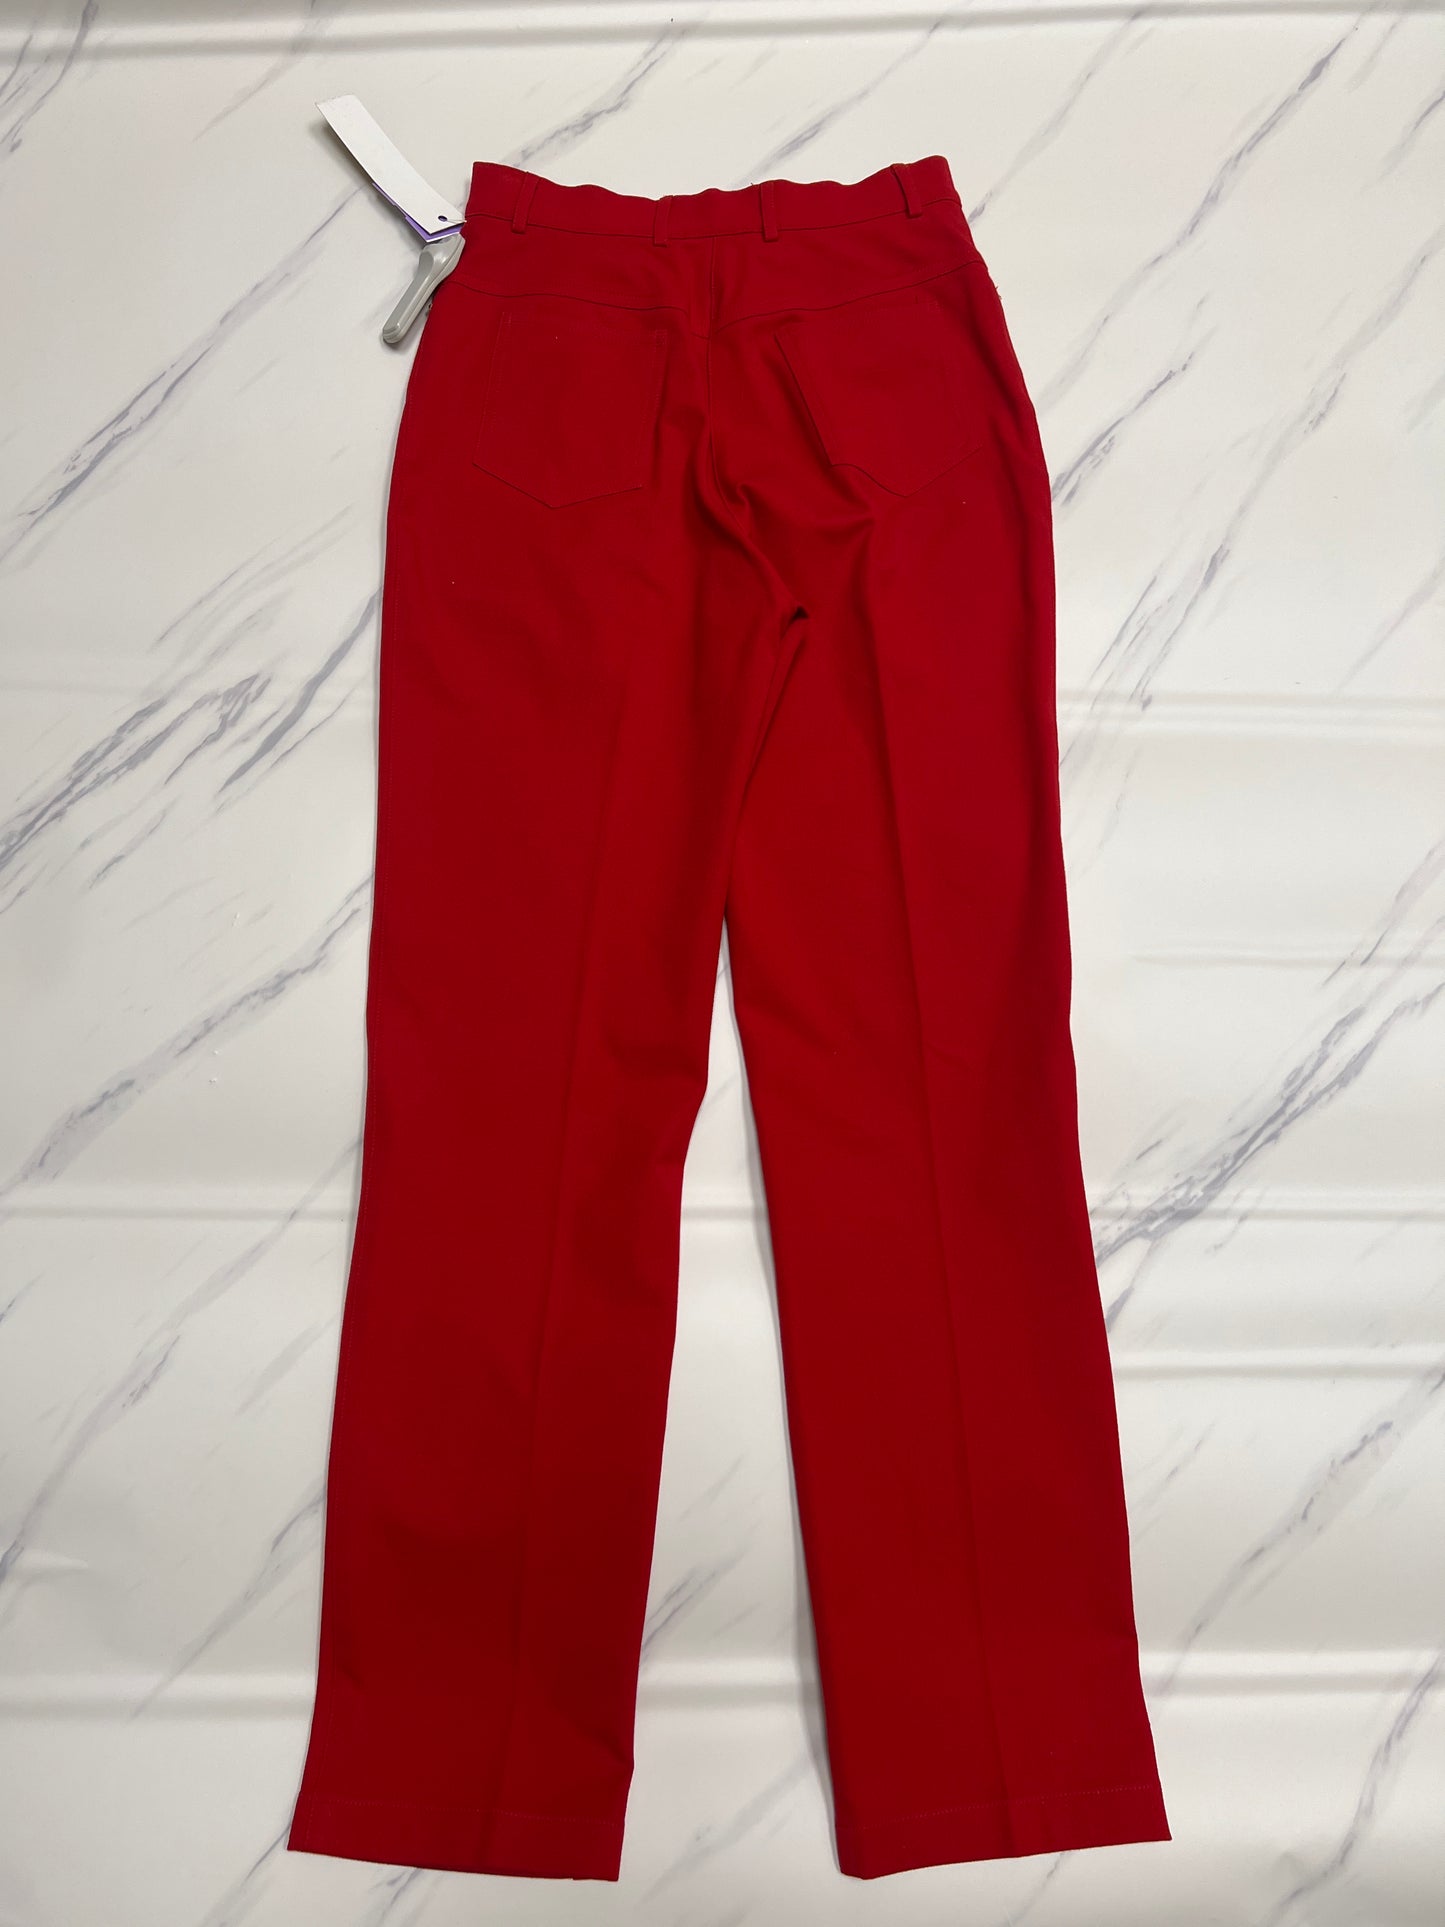 Pants Ankle By St John Collection  Size: 2